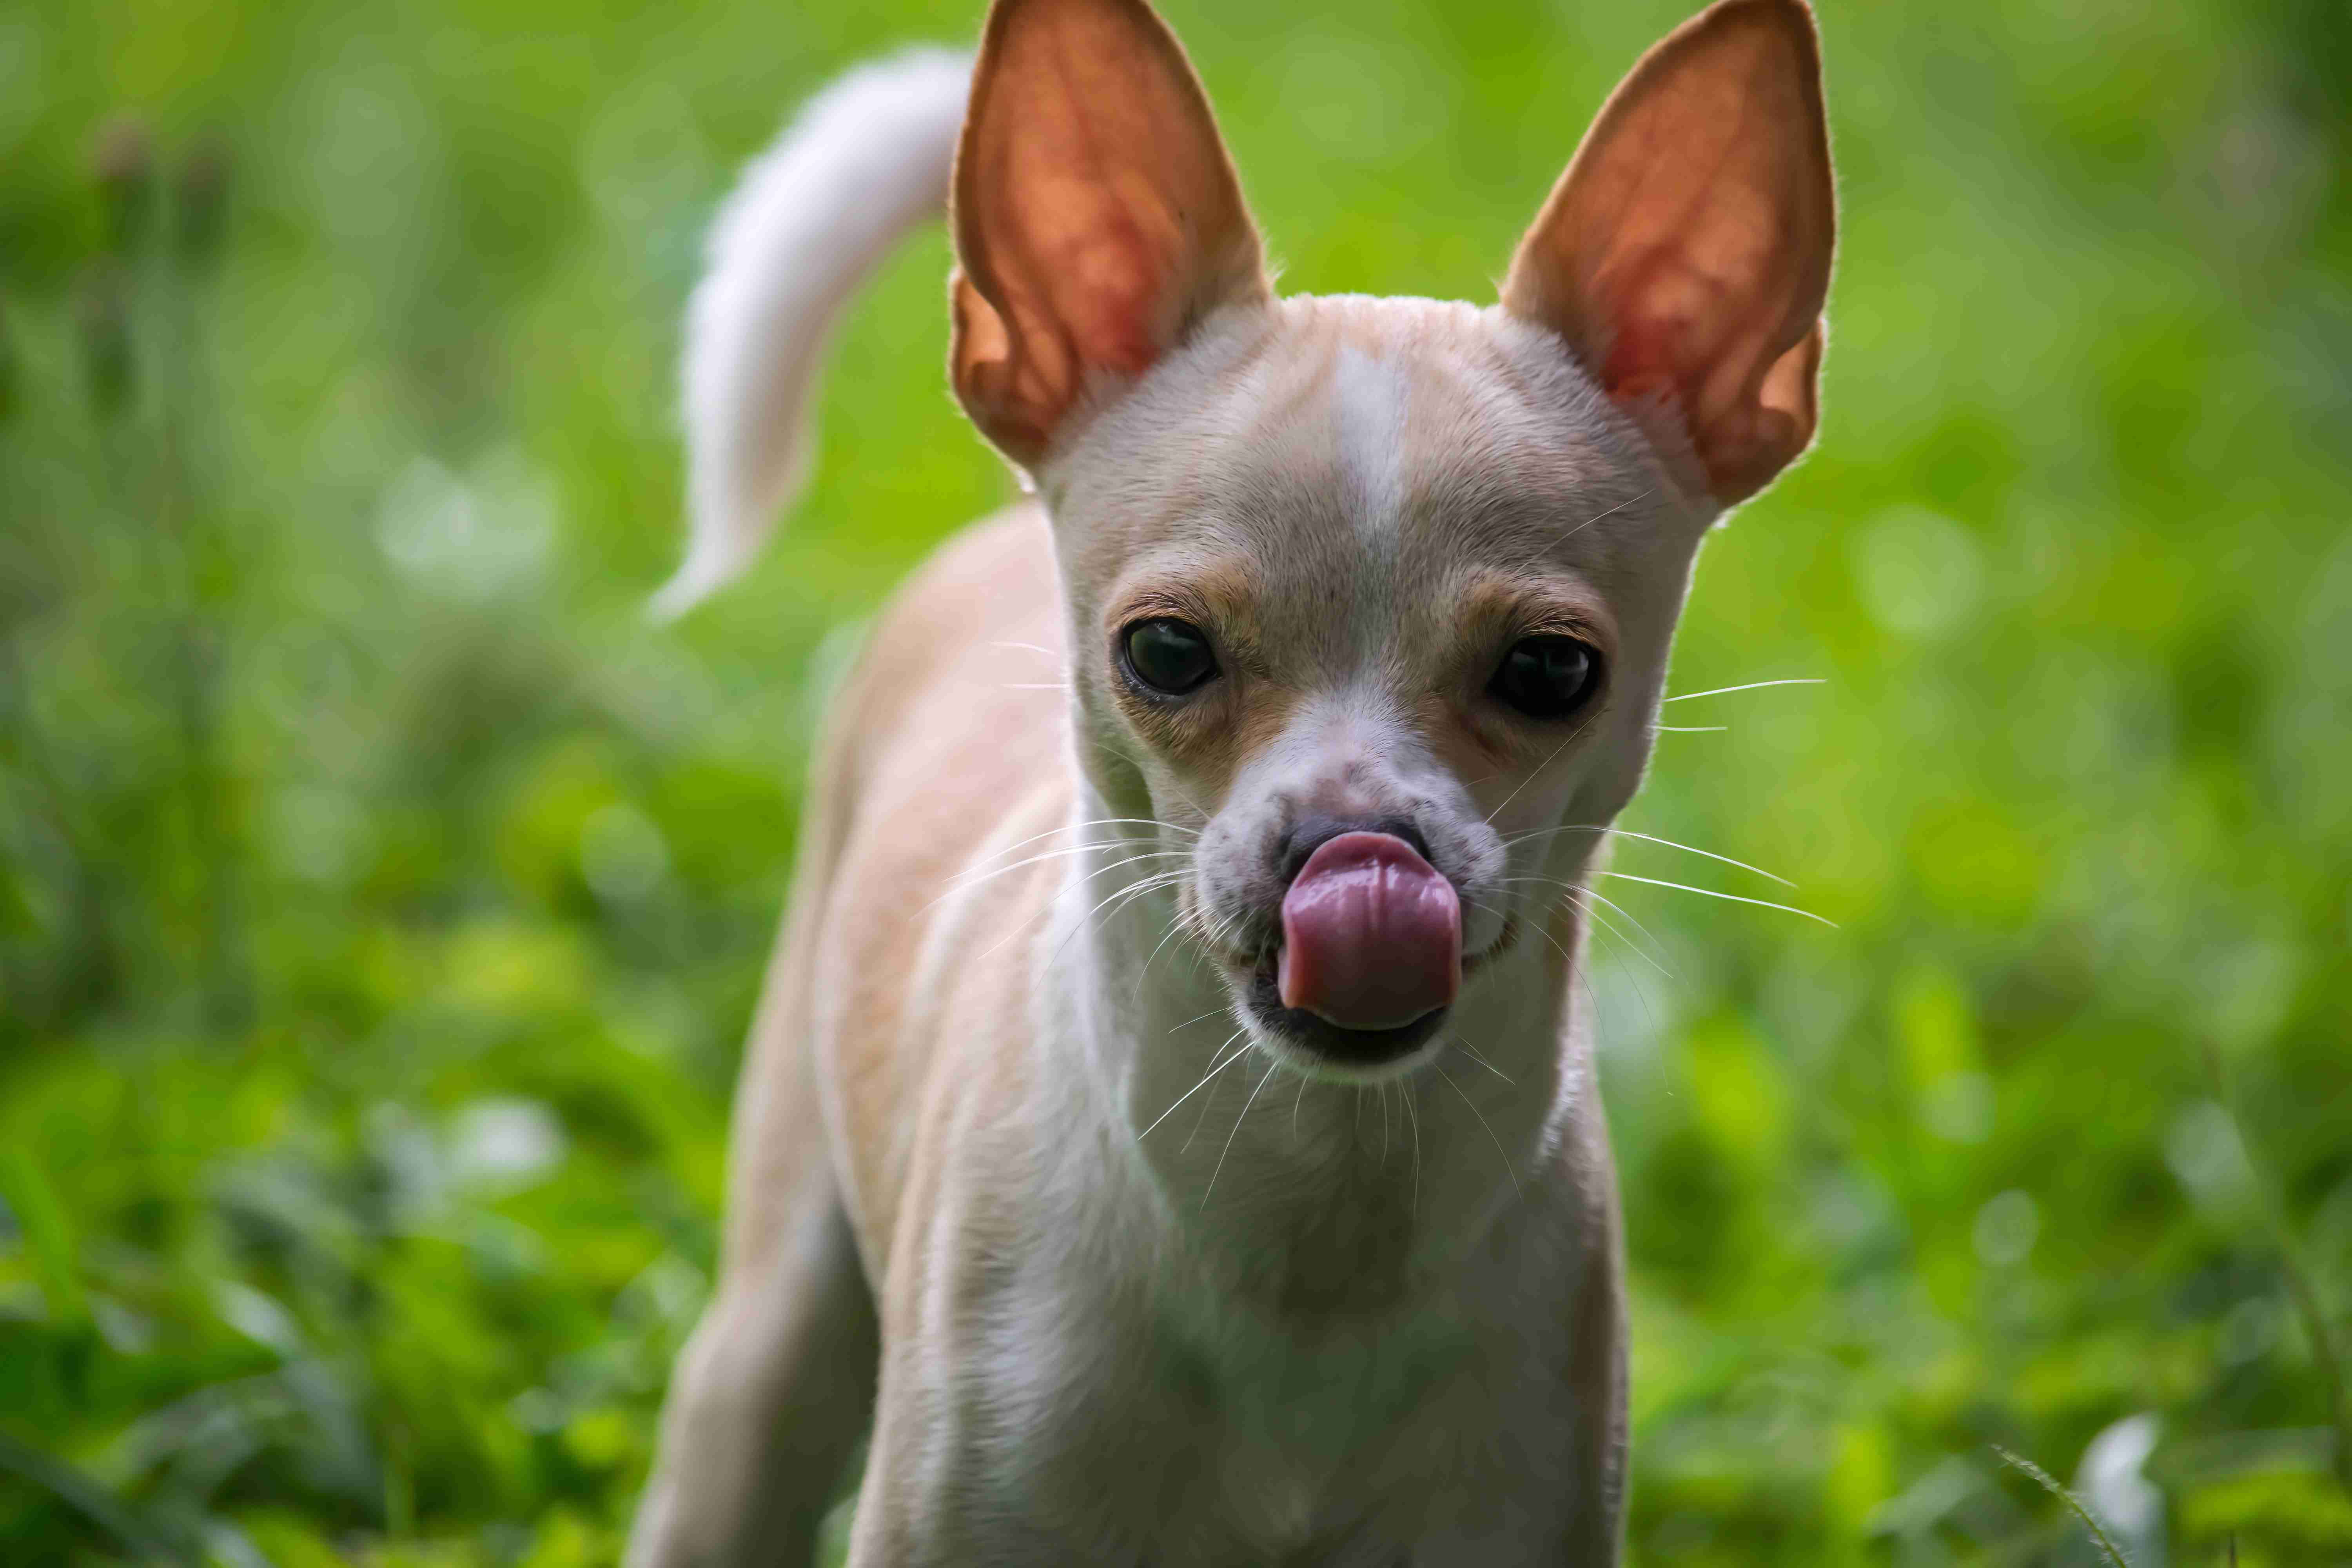 Are there any specific techniques to help a Chihuahua calm down during a bout of anger?